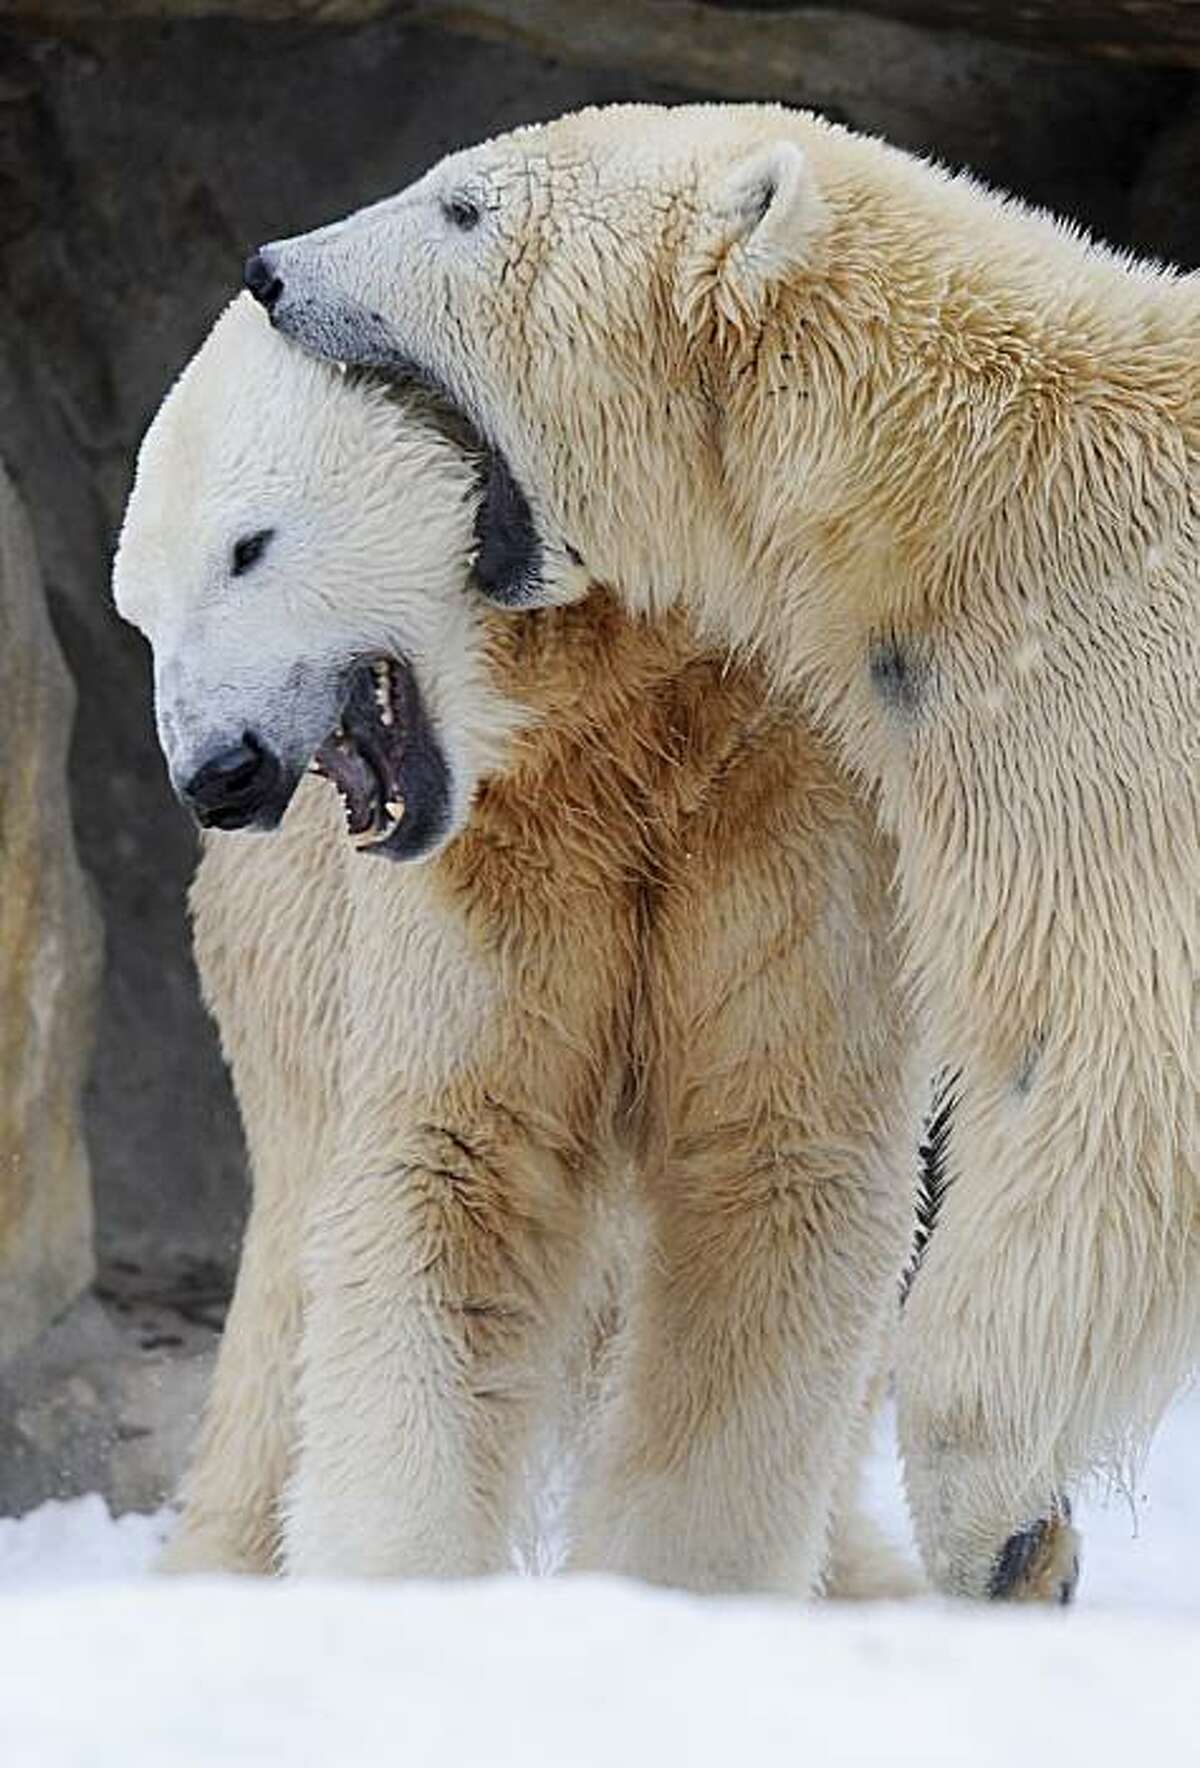 Knut, the 3-year-old polar bear (top) and Giovanna, a female polar bear on loan from the Munich zoo, play in their enclosure at Berlin's Zoologischer Garten zoo January 8, 2010. With temperatures below zero and an ample supply of snow, Knut is finally experiencing his natural habitat.